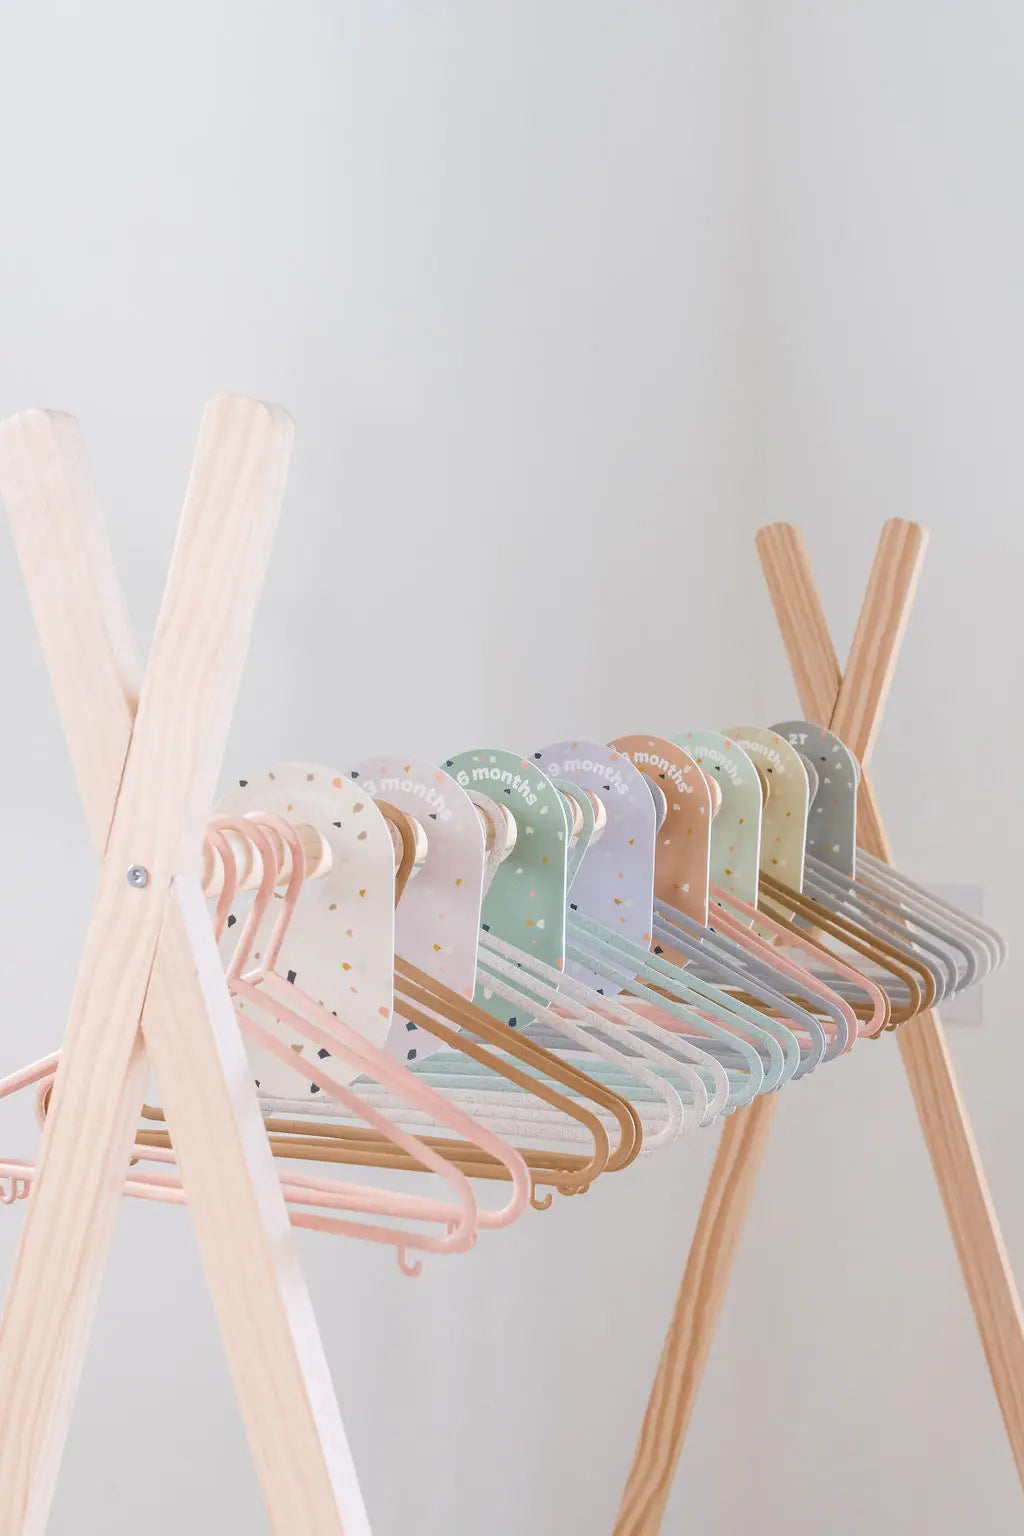 Wheat Straw Hangers - Speckled Pink